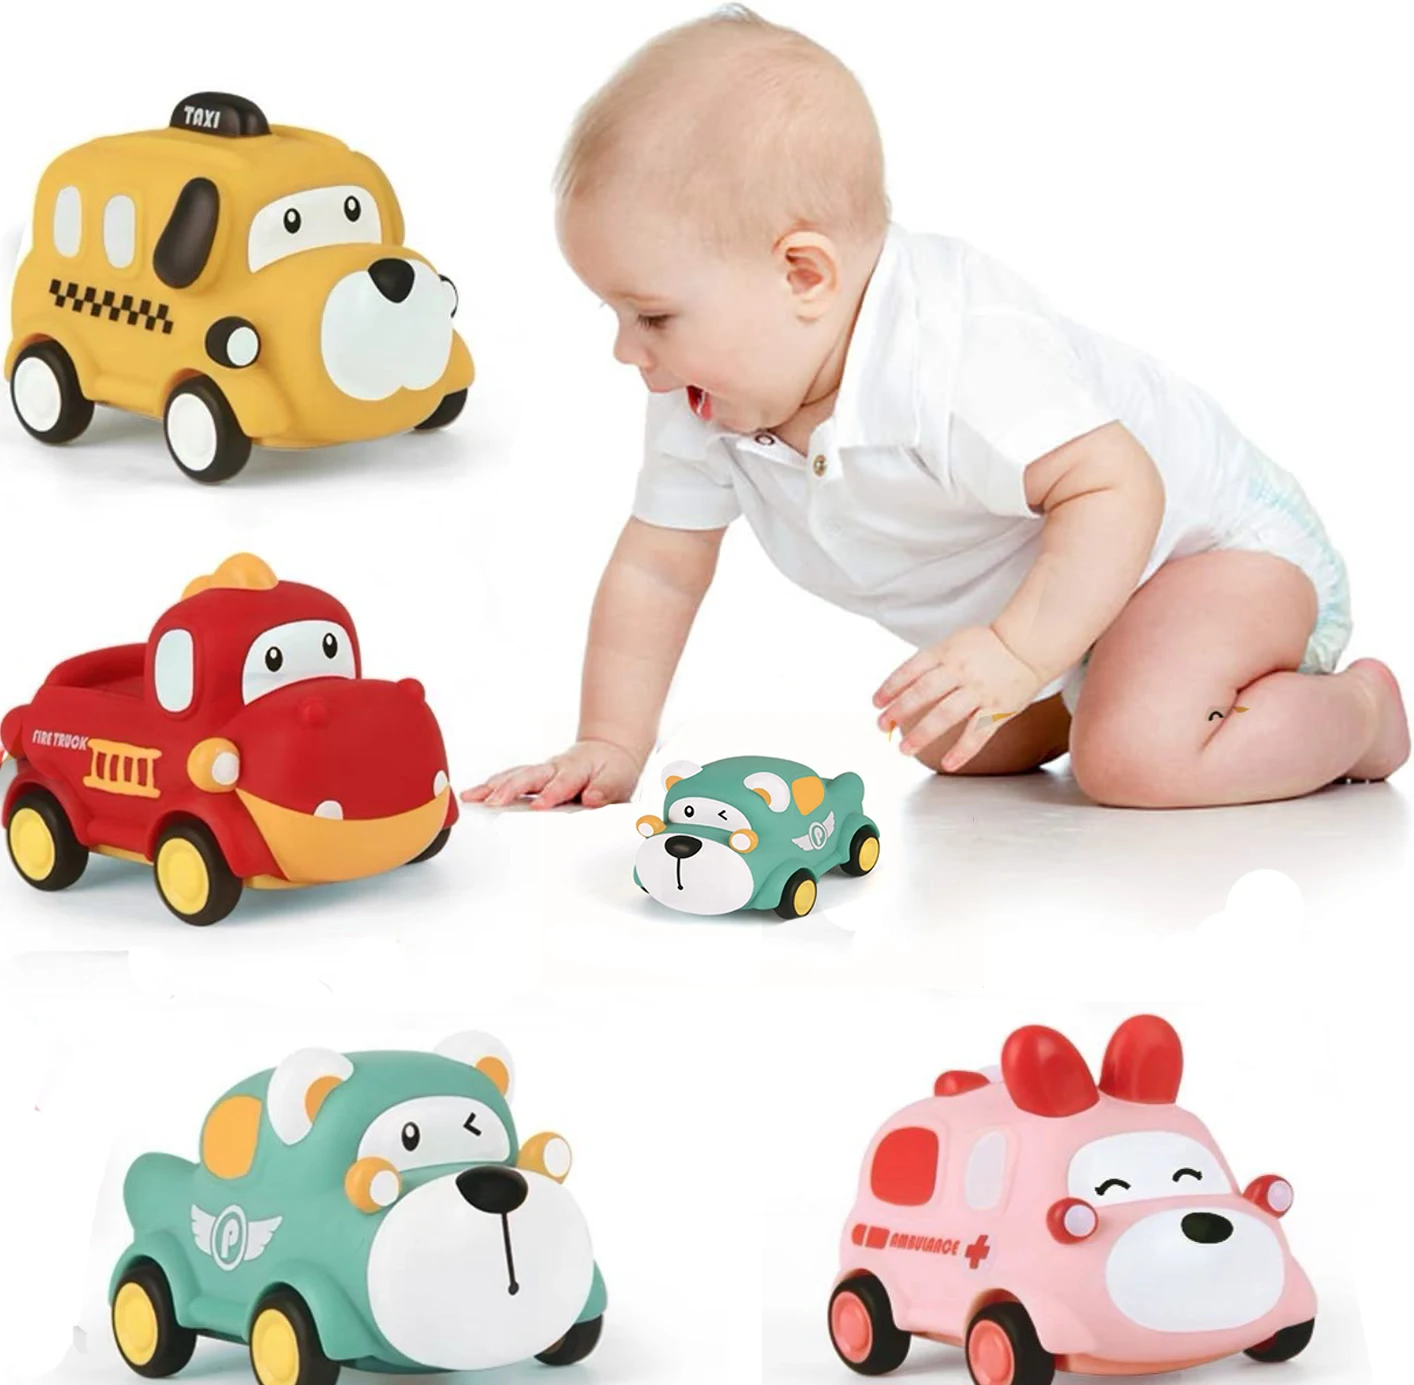 

Cute Montessori Inertia Cars Fun Soft Rubber Car Toys For Baby Toddler Kids Early Learning Educational Toy Kids Birthday Gift